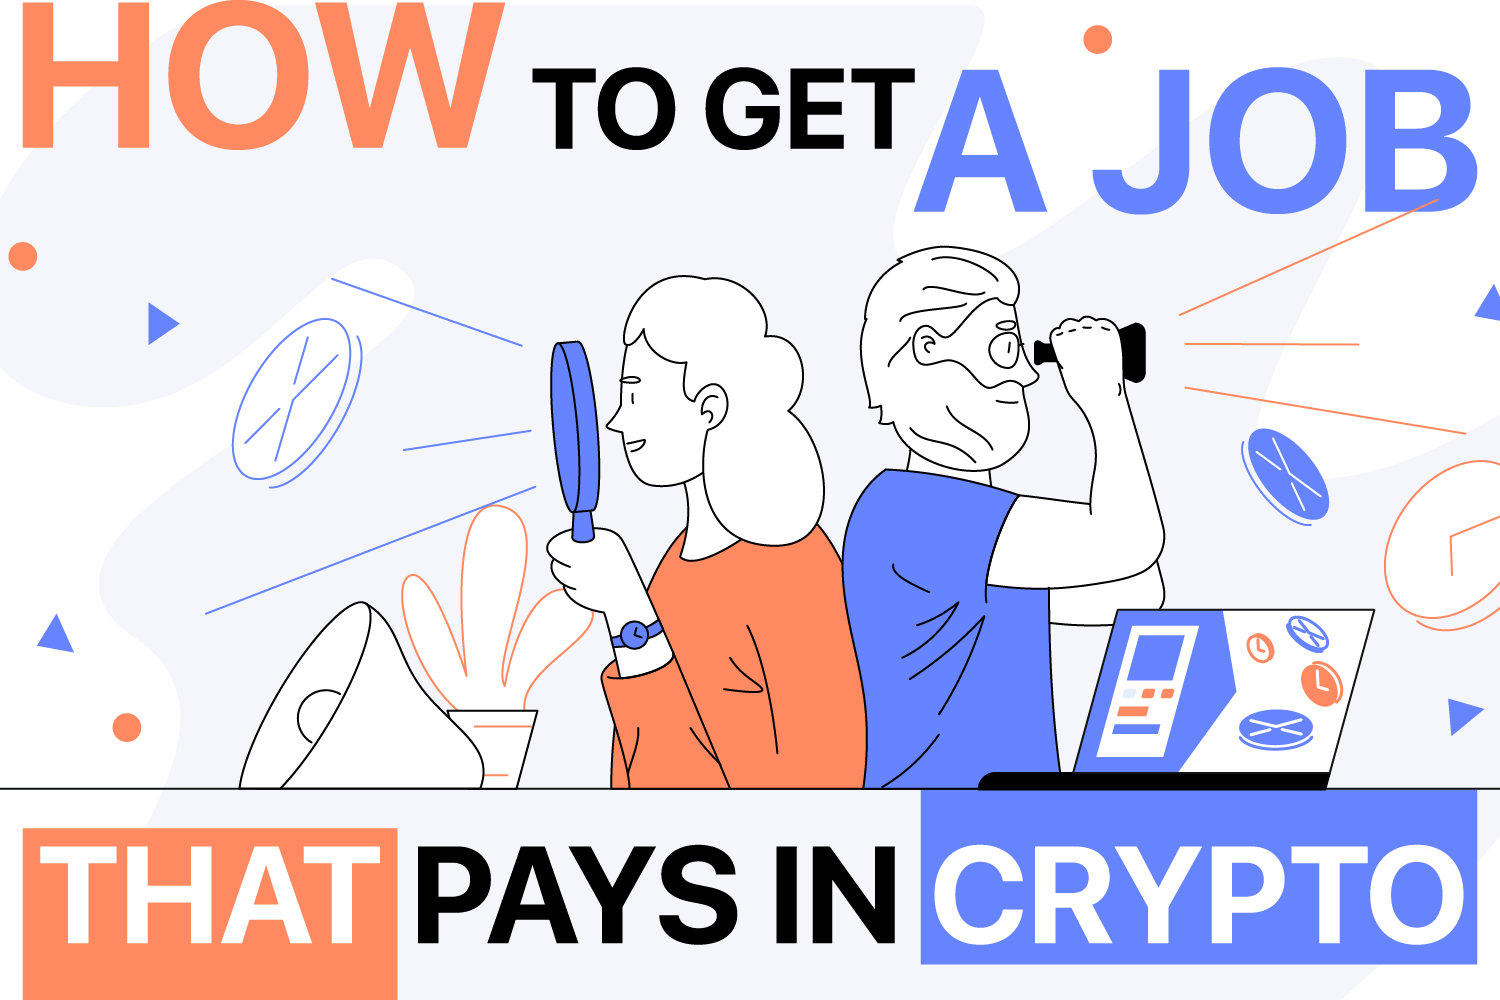 How to Get a Job that Pays in Crypto